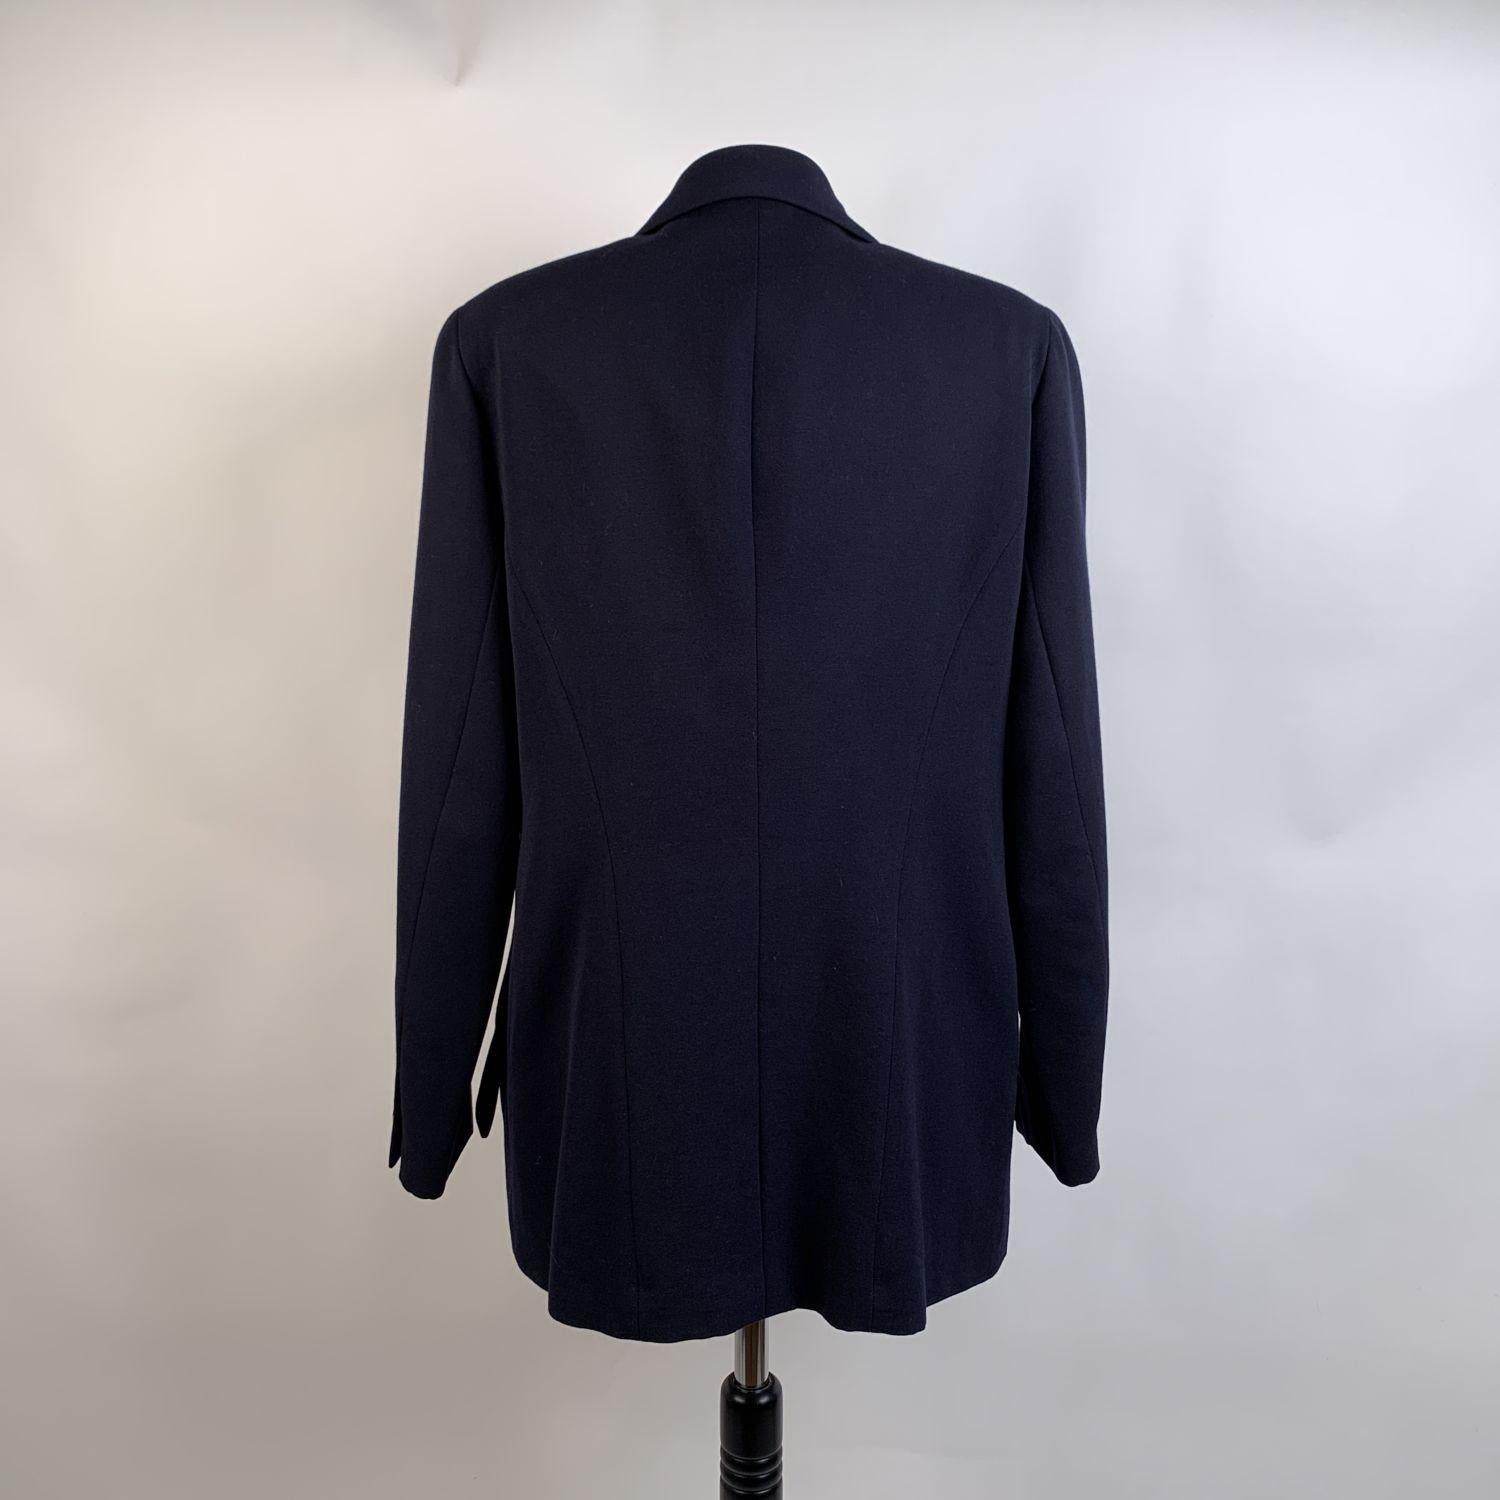 Black Chanel Navy Blue Double Breasted Blazer Jacket CC Buttons